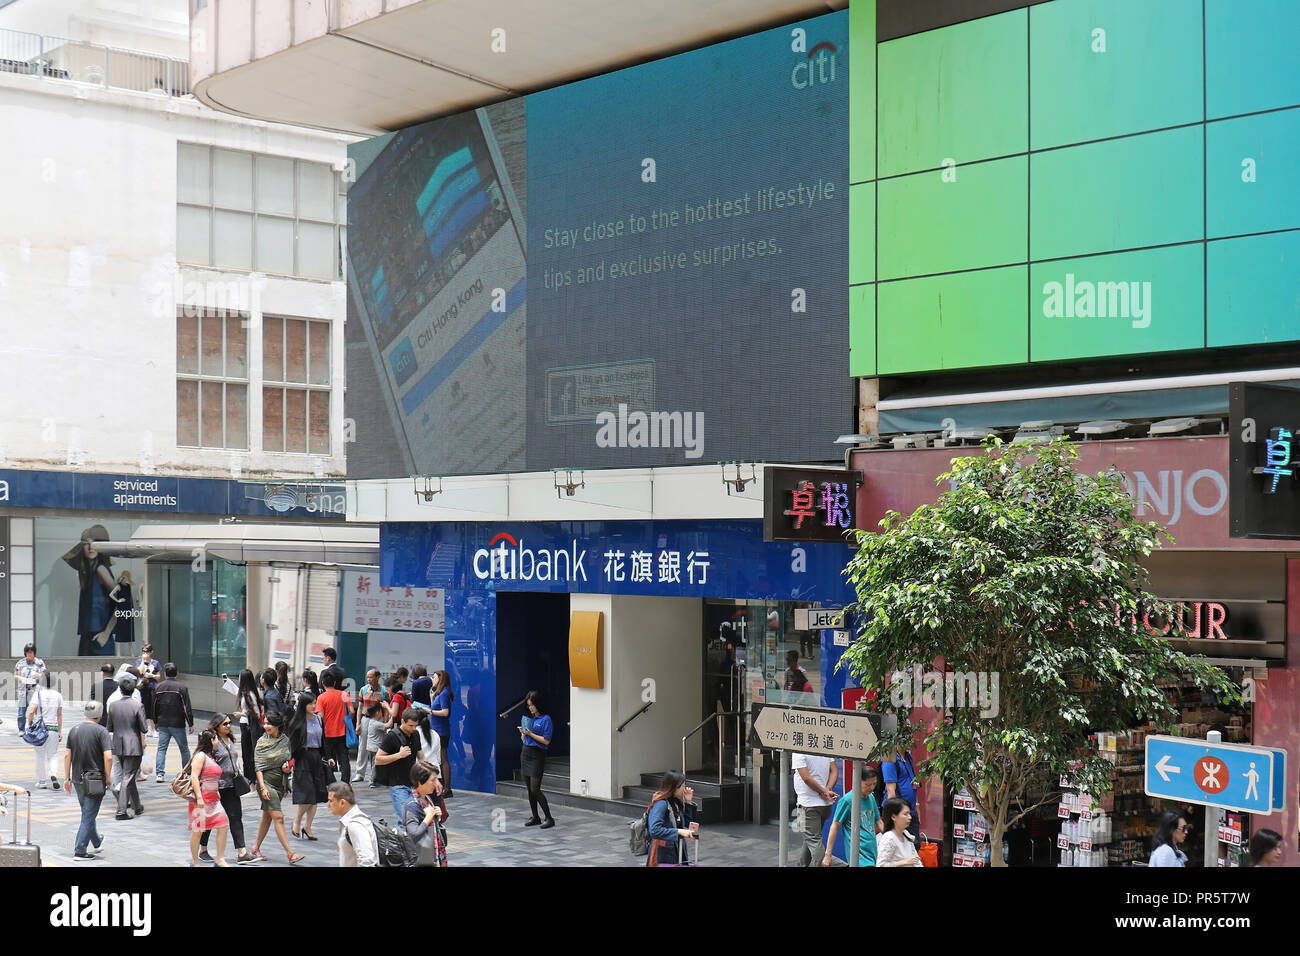 People in front of famous Citibank branch on Nathan Road in Kowloon part of Hong Kong with large advertisement display above the entrance Stock Photo